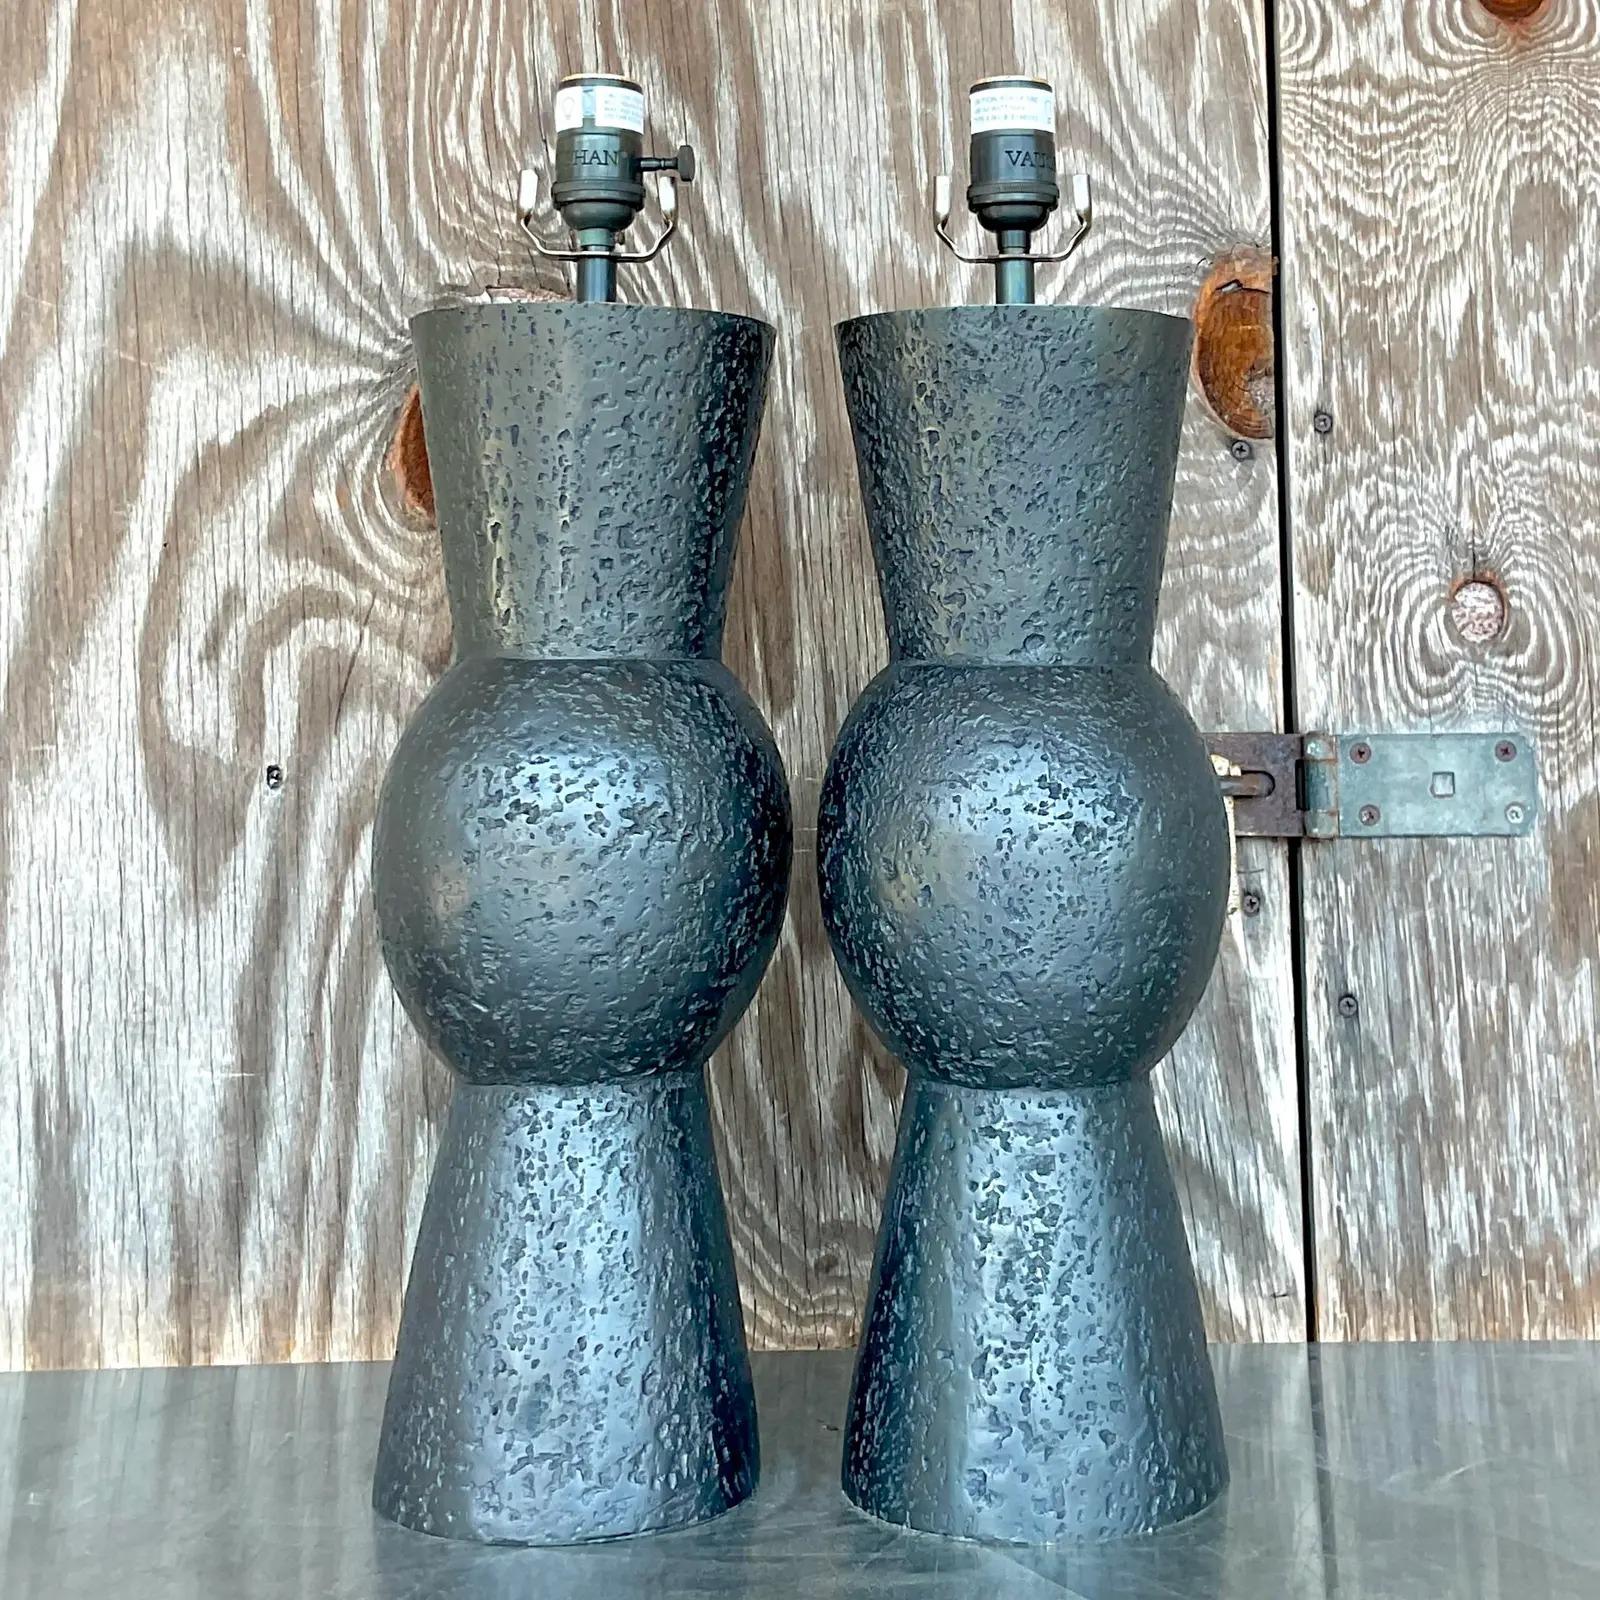 A fantastic pair of vintage Contemporary table lamps. Made by the chic Vaughan group. Patinated bronze over heavy brass in a abstract hourglass shape. Acquired from a Palm Beach estate.